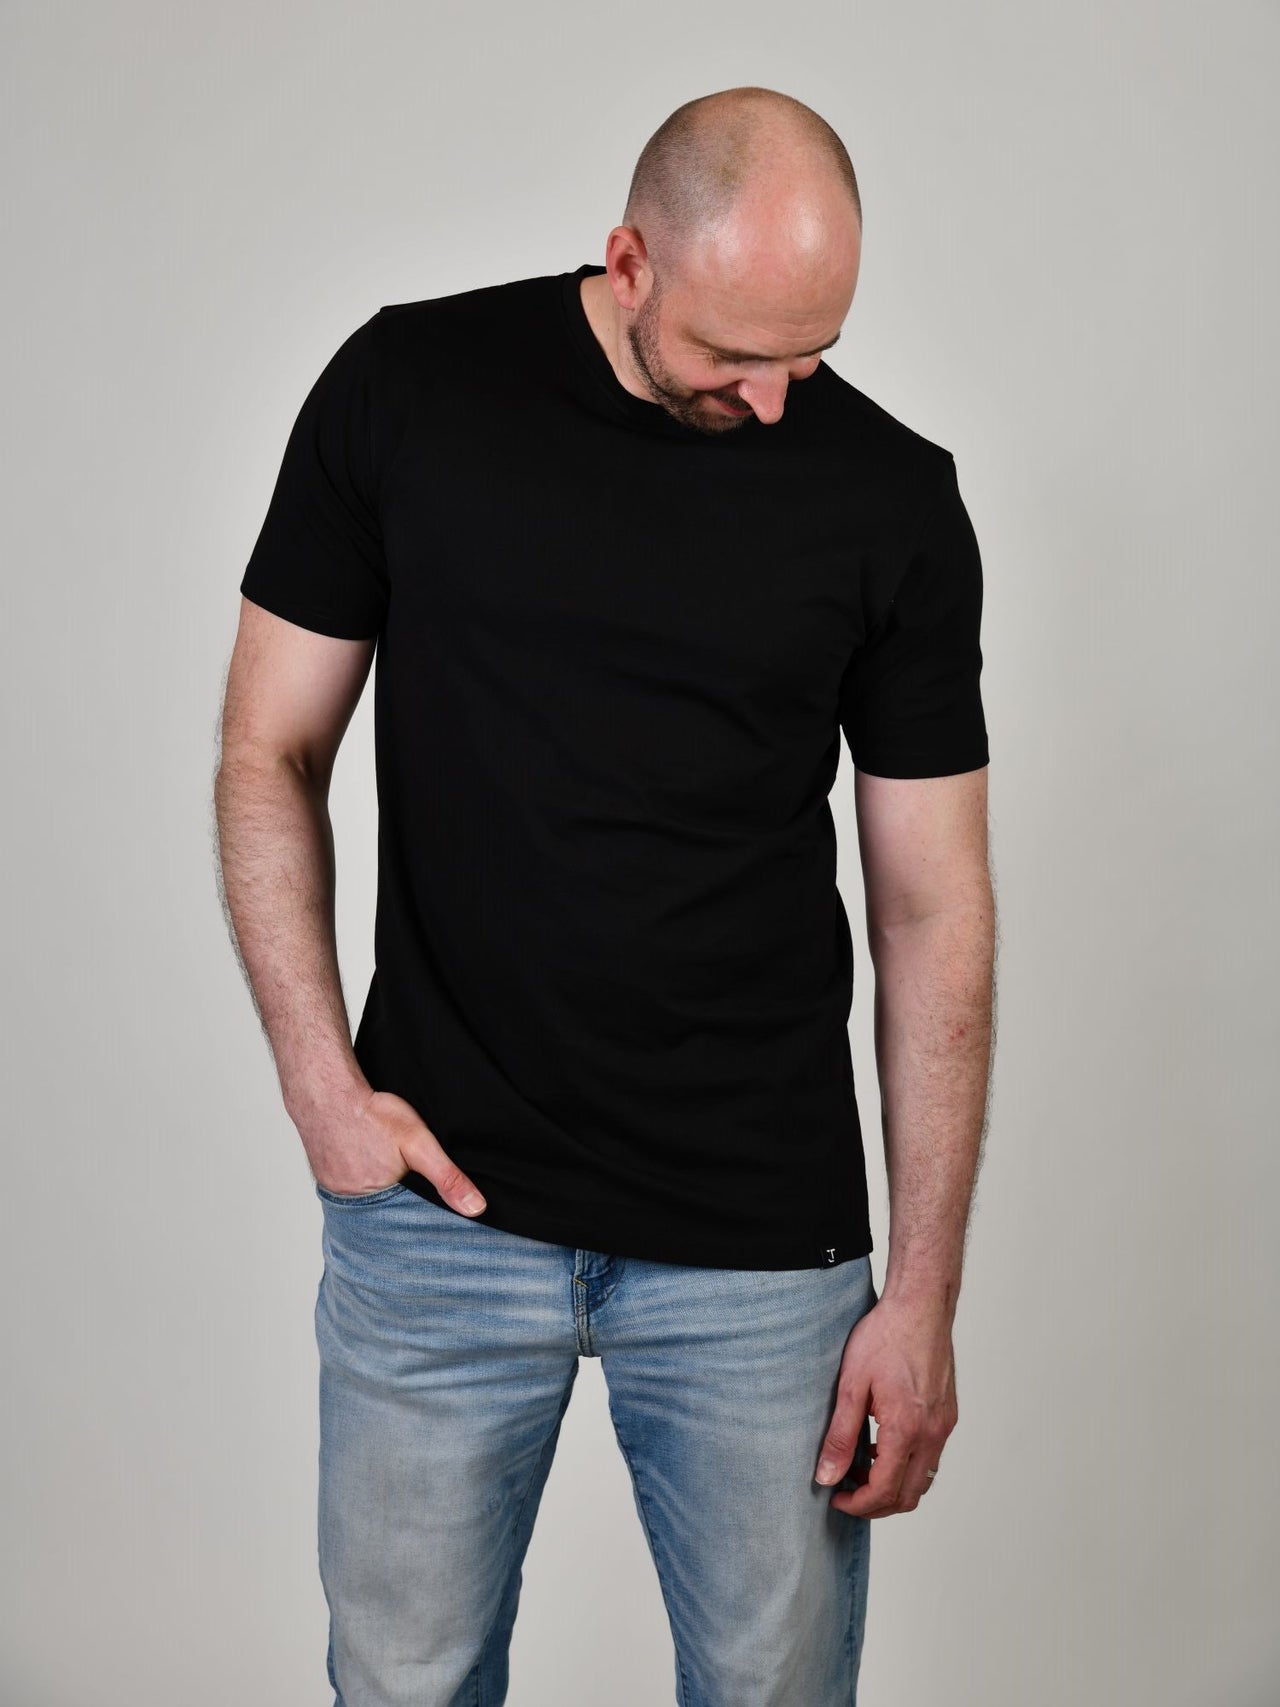 A tall and slim guy smiling in the studio and wearing a black XL tall slim t-shirt.